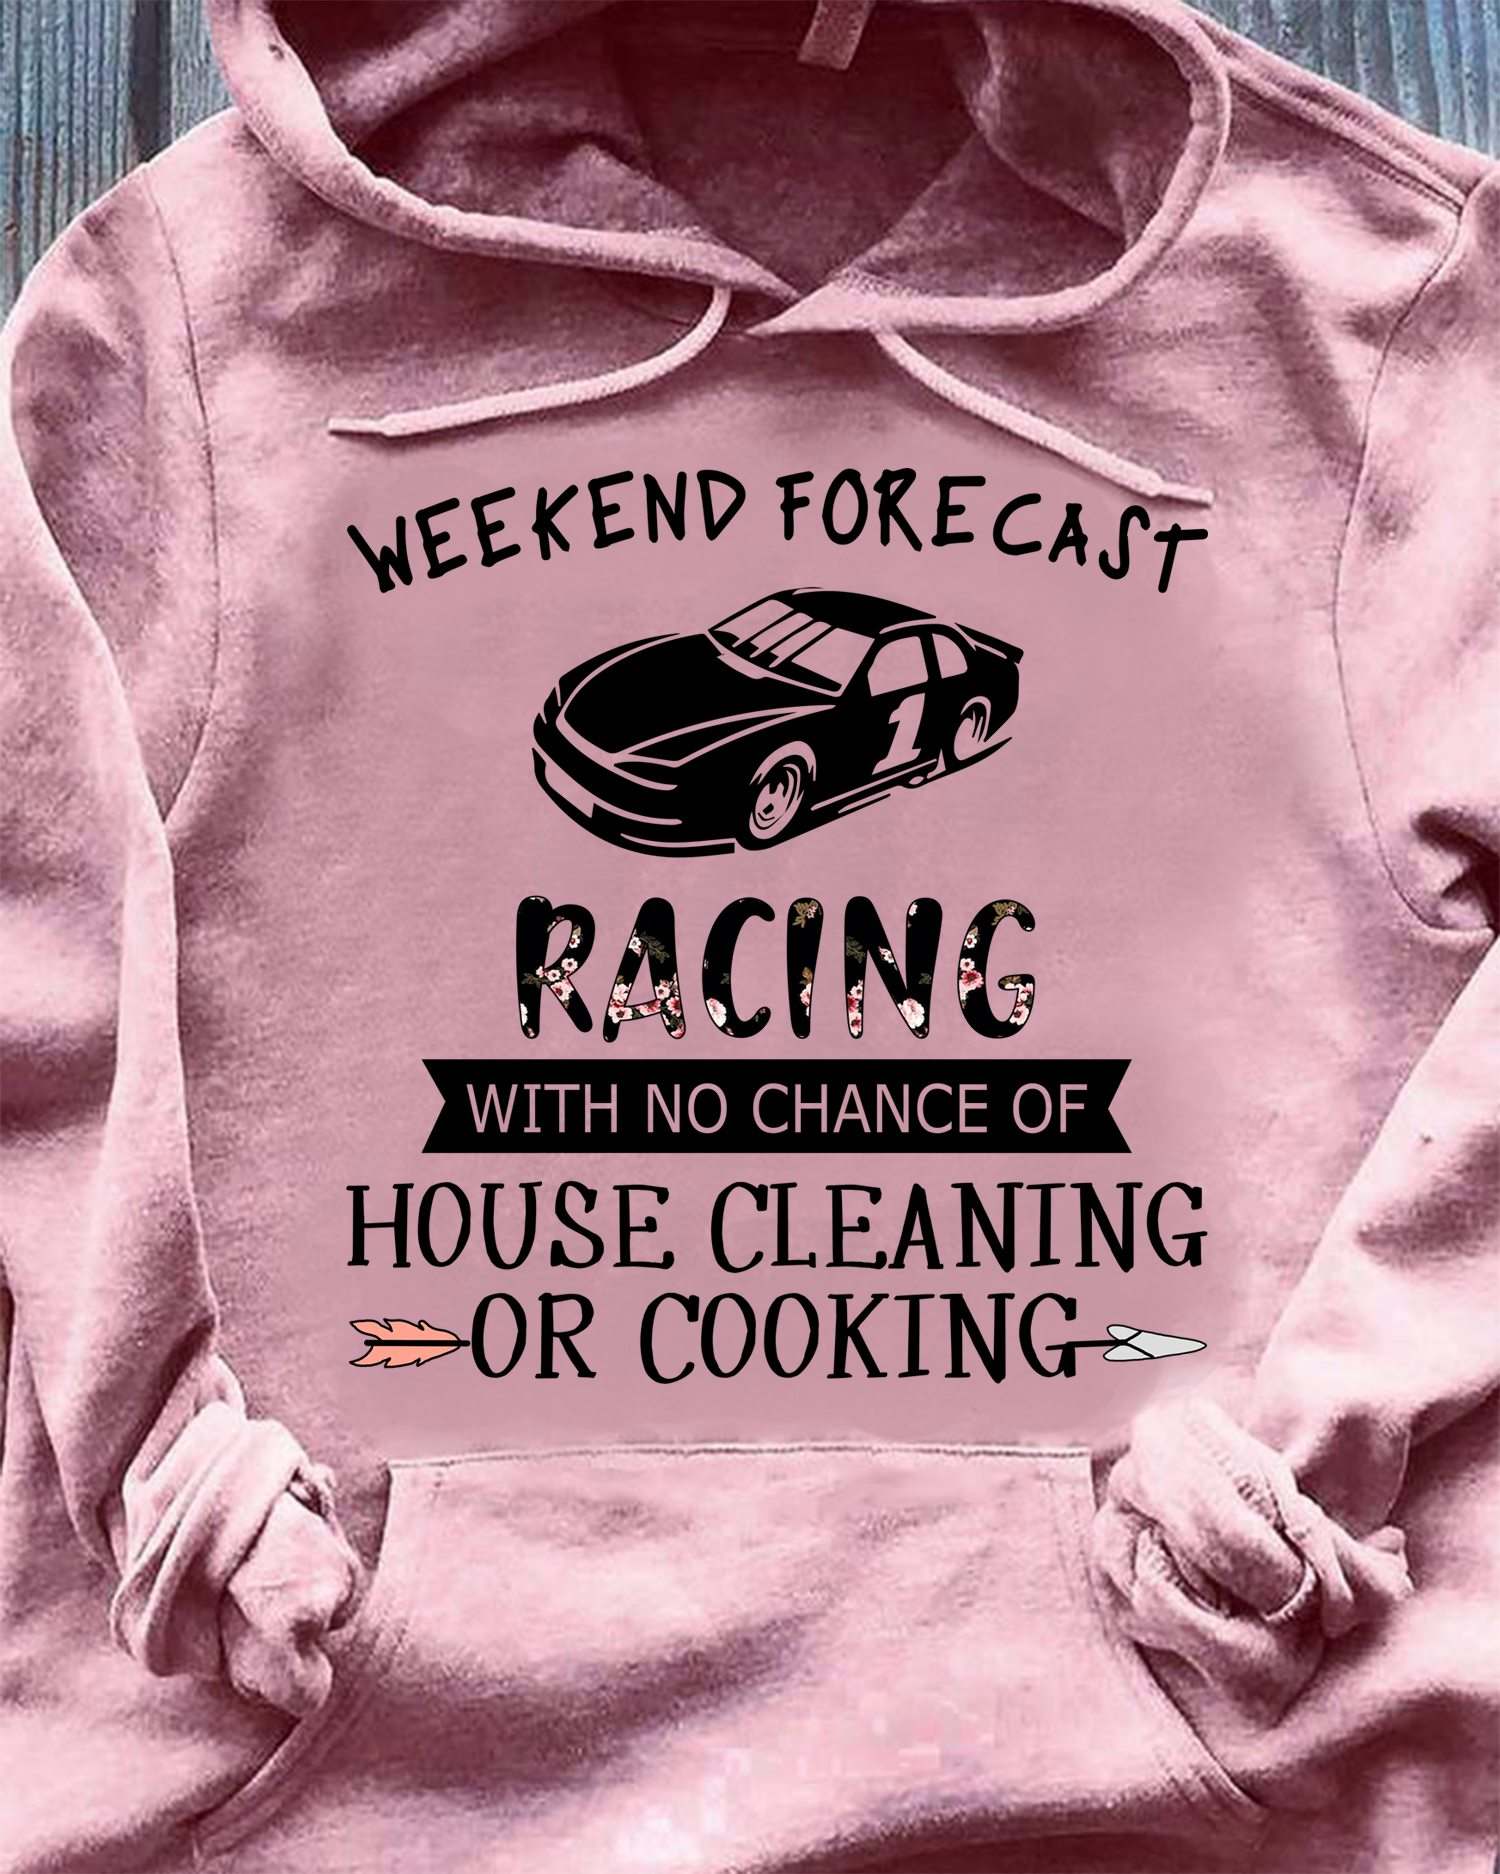 Weekend forecast racing with no chance of house cleaning or cooking